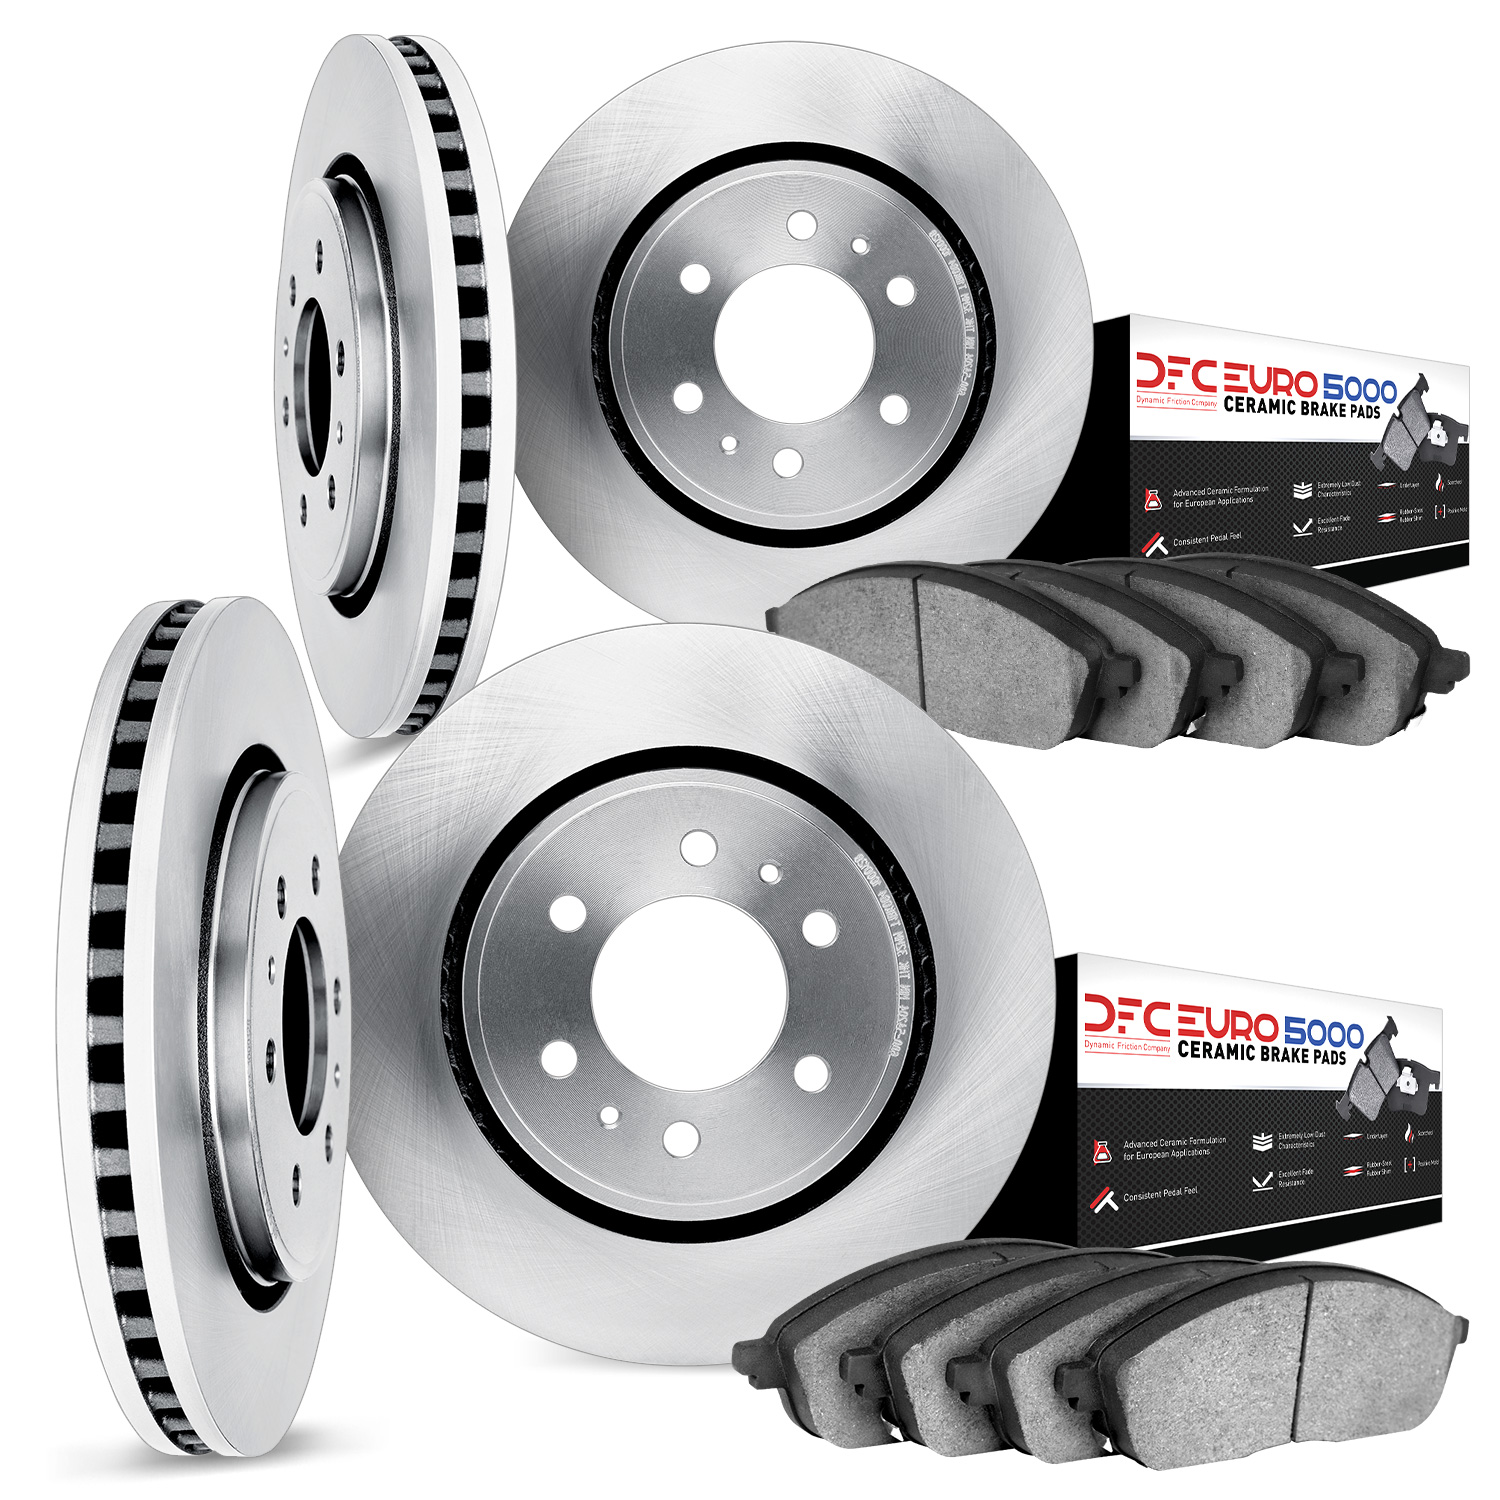 6604-10643 Brake Rotors w/5000 Euro Ceramic Brake Pads, 2002-2005 GM, Position: Front and Rear